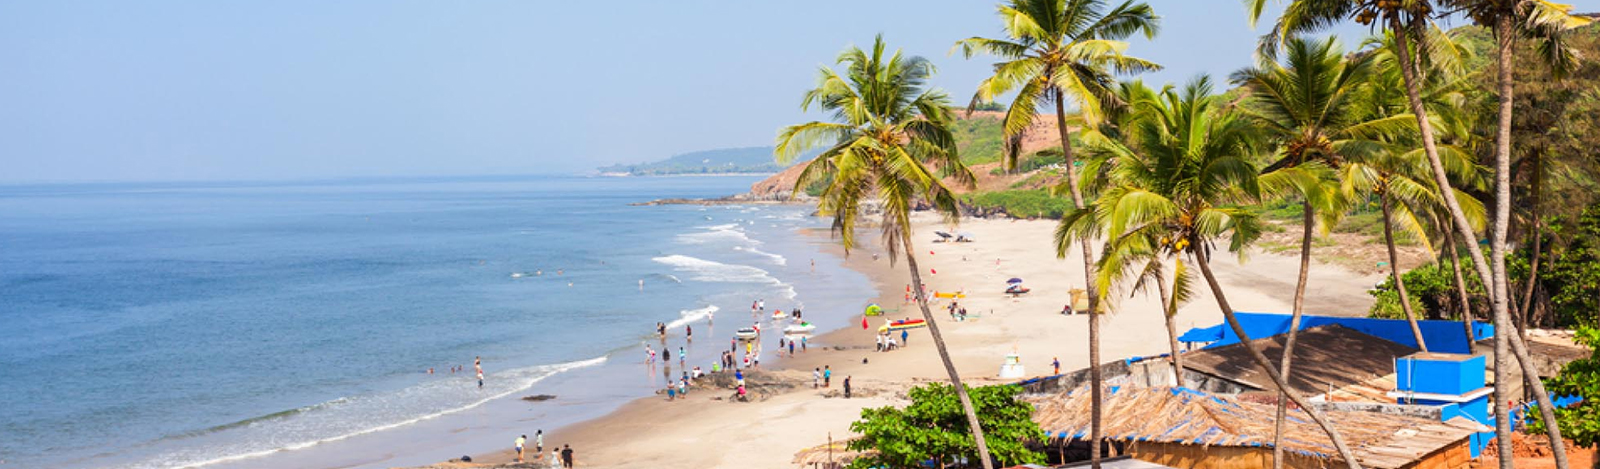 Kerala Beaches, Backwaters and Hill Station Tour